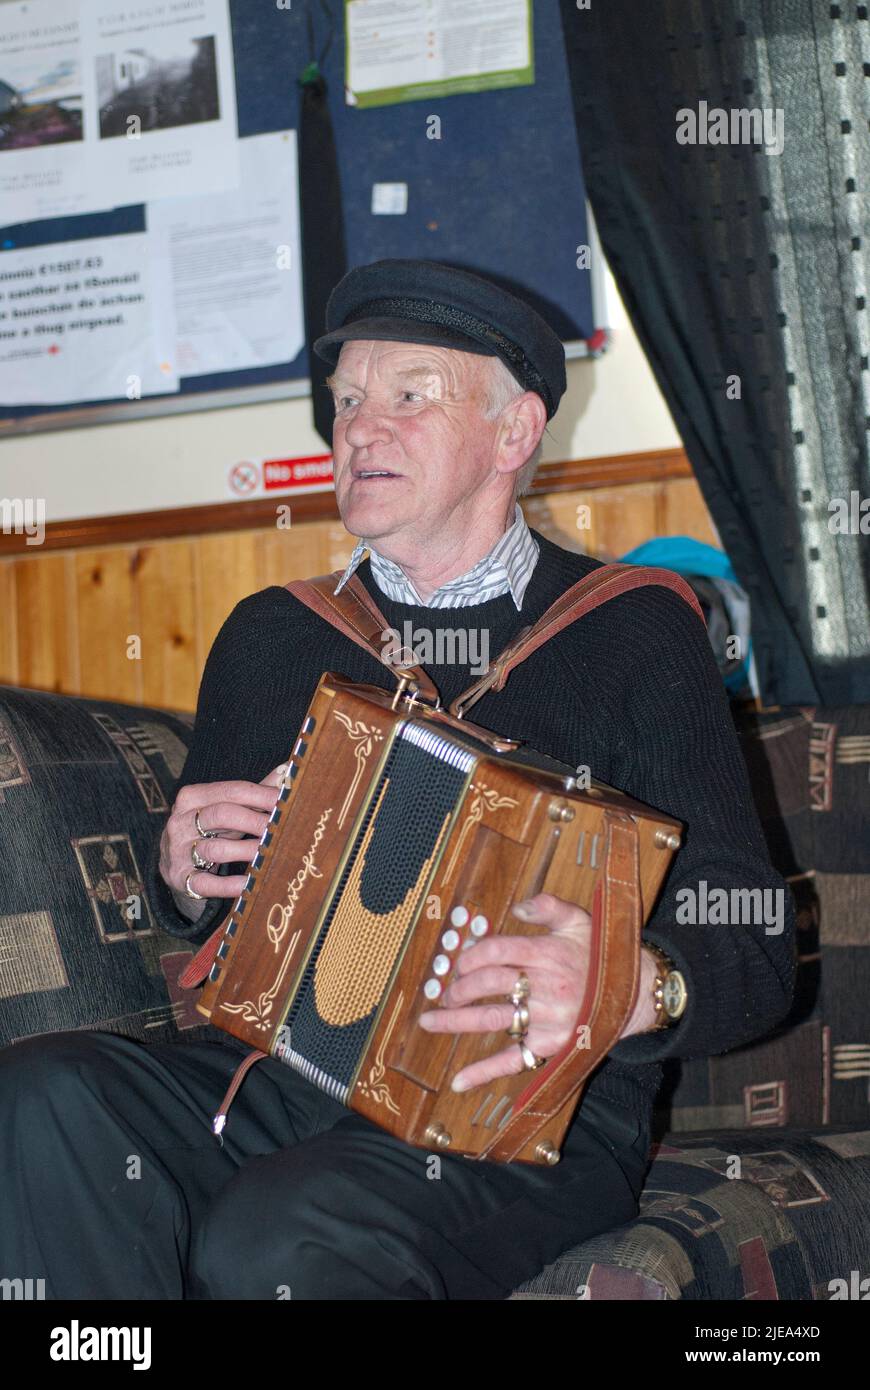 Patsy Dan Rodgers (1944-2018, King of Tory Island from 1990 to 2018) playing his accordion, Tory Island, County Donegal, Ireland Stock Photo